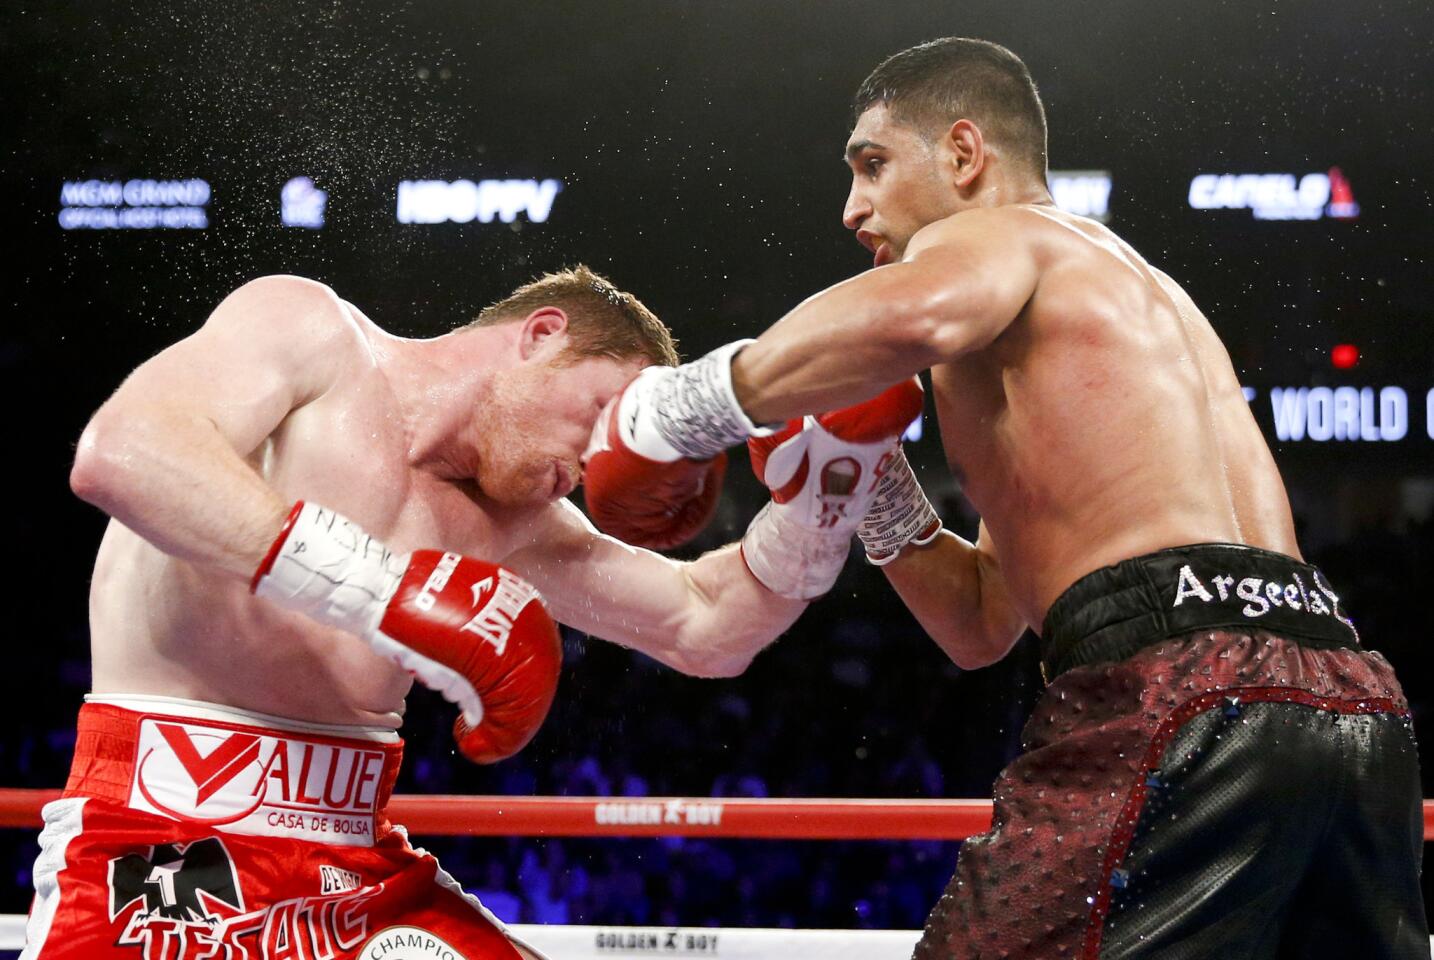 Canelo Alvarez, left, and Amir Khan trade punches inside during their WBC middleweight title fight Saturday.